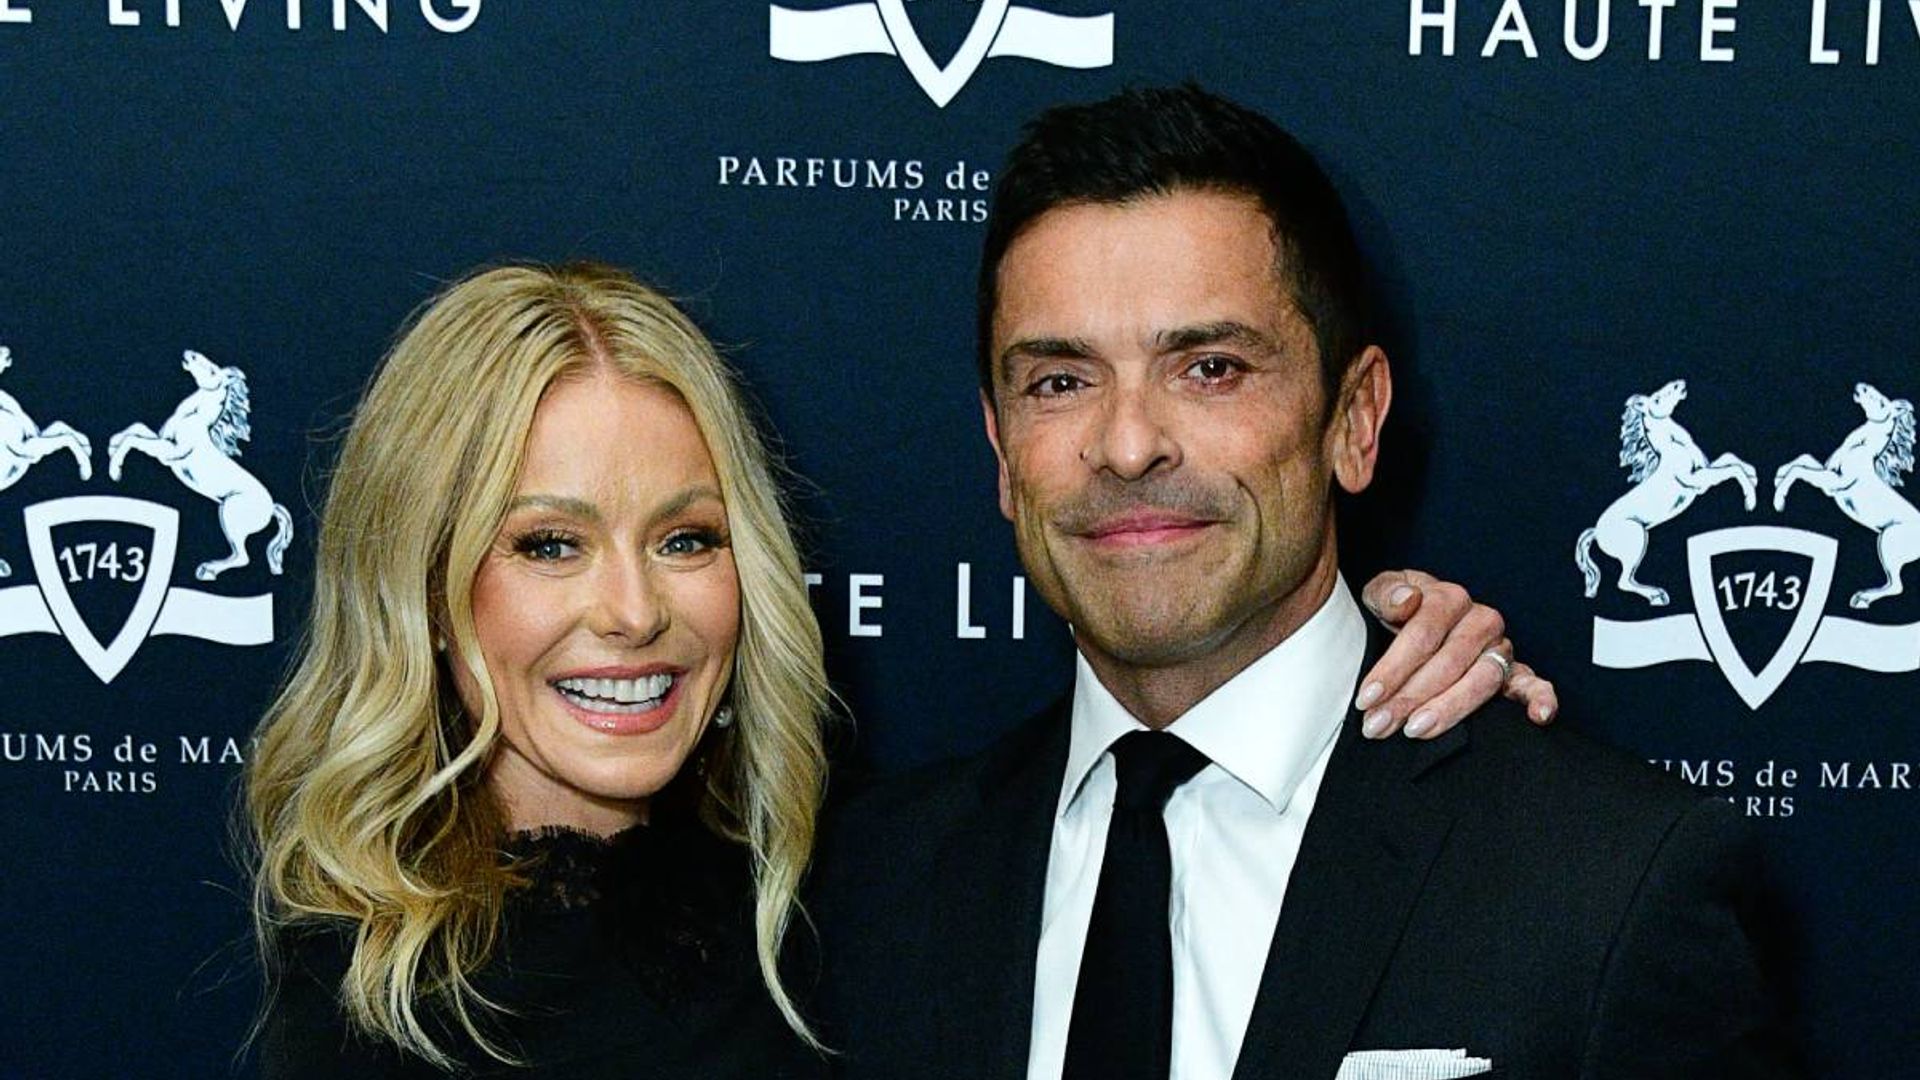 Kelly Ripa and Ryan Seacrest share shocking story of ‘intimate’ affair on Live! – but it’s not what you think!